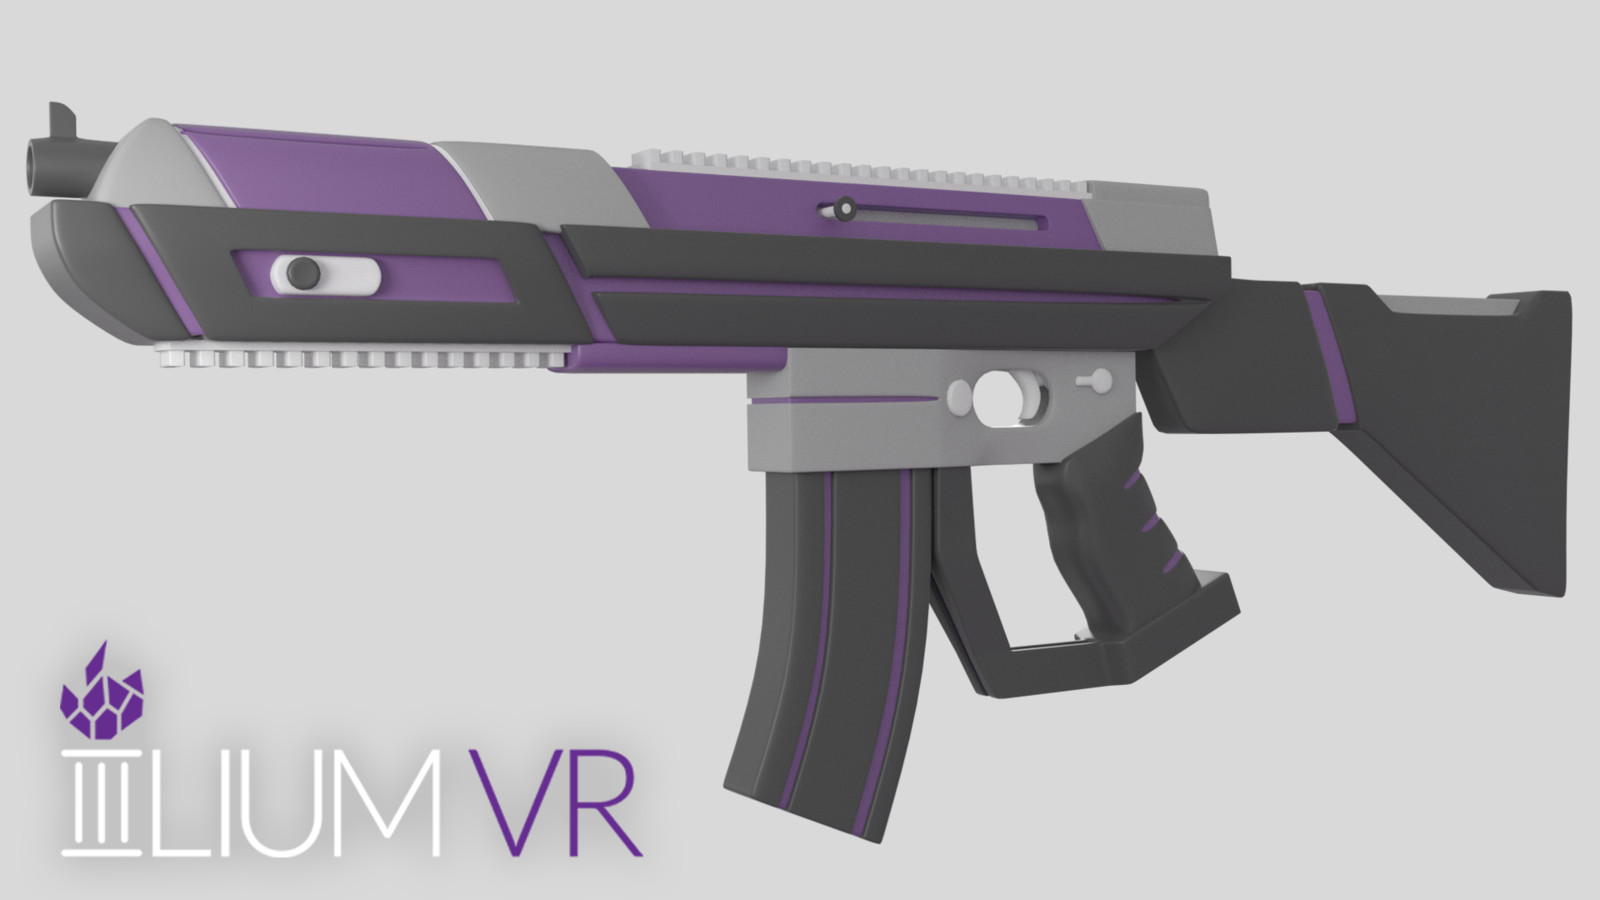 Final perspective render of completed rifle model